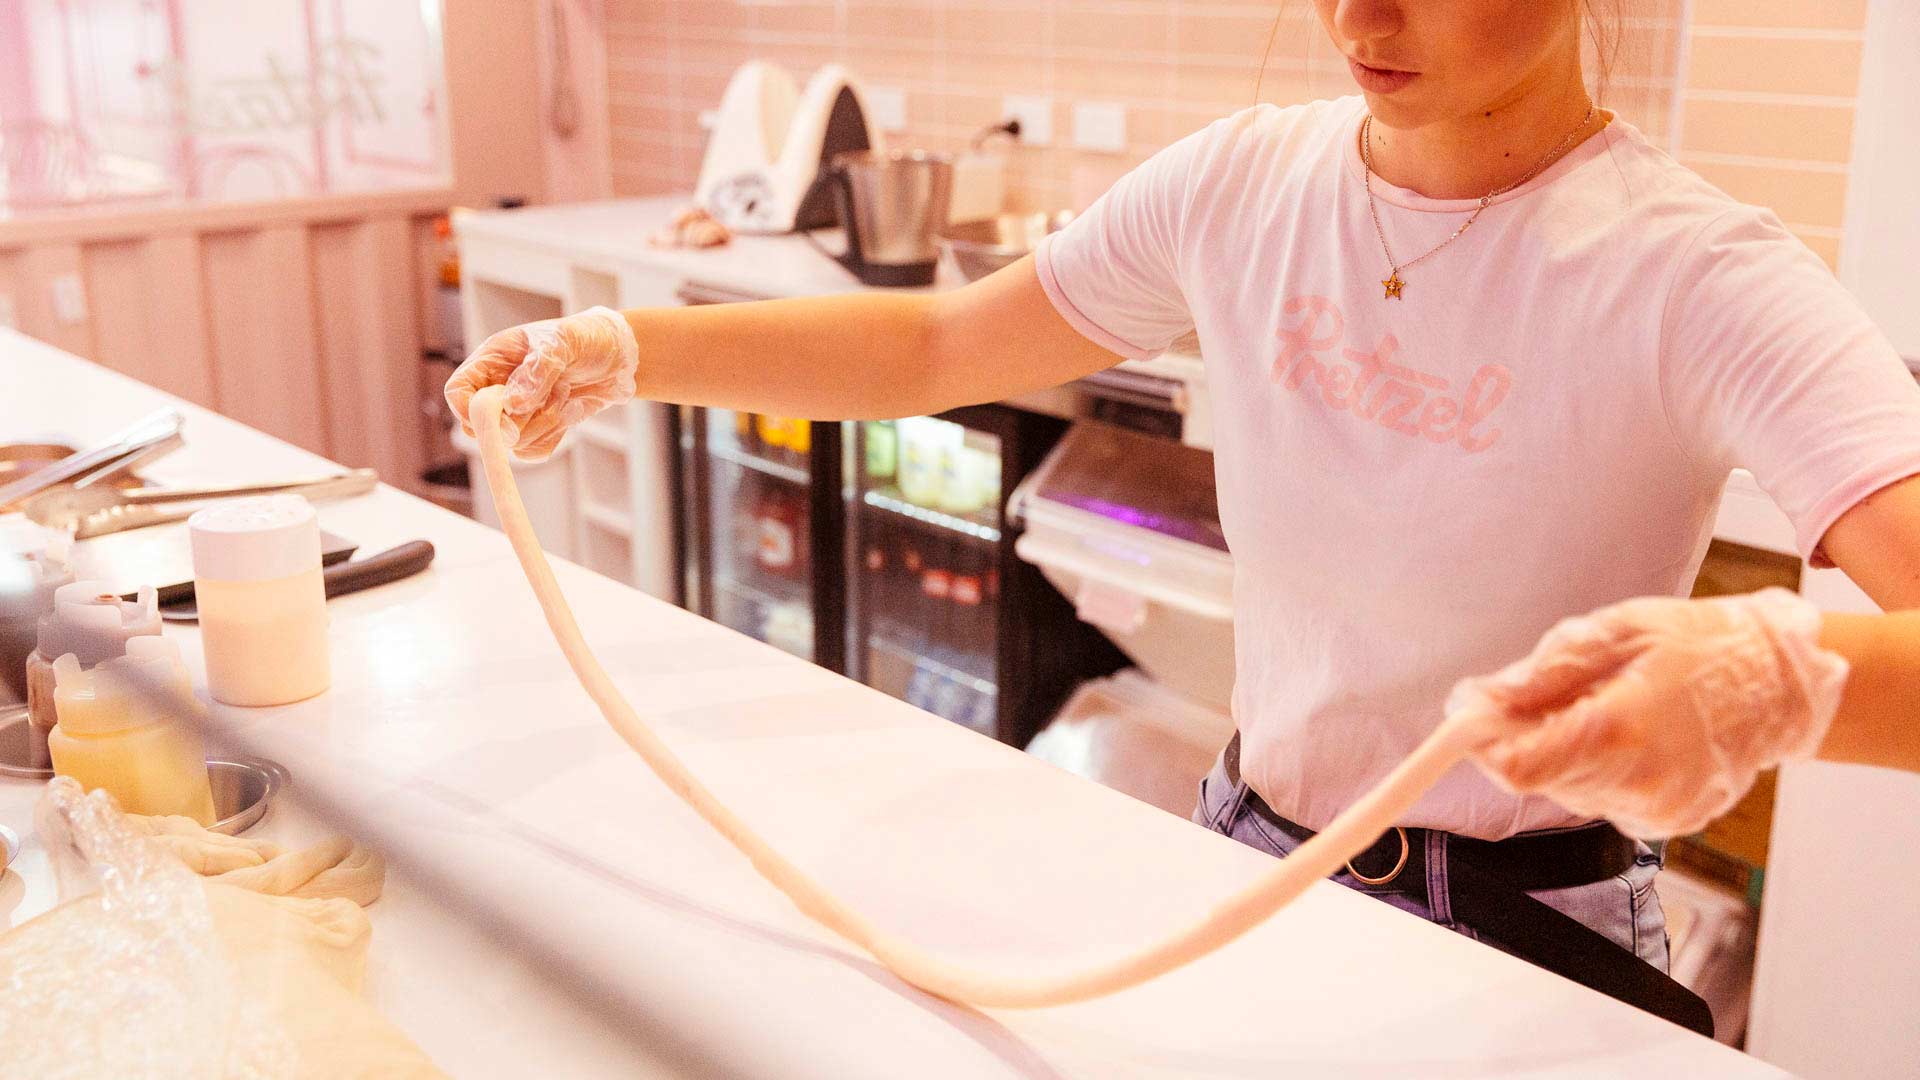 An All-Pink Pretzel Shop Has Opened Its Colourful Doors in South Yarra